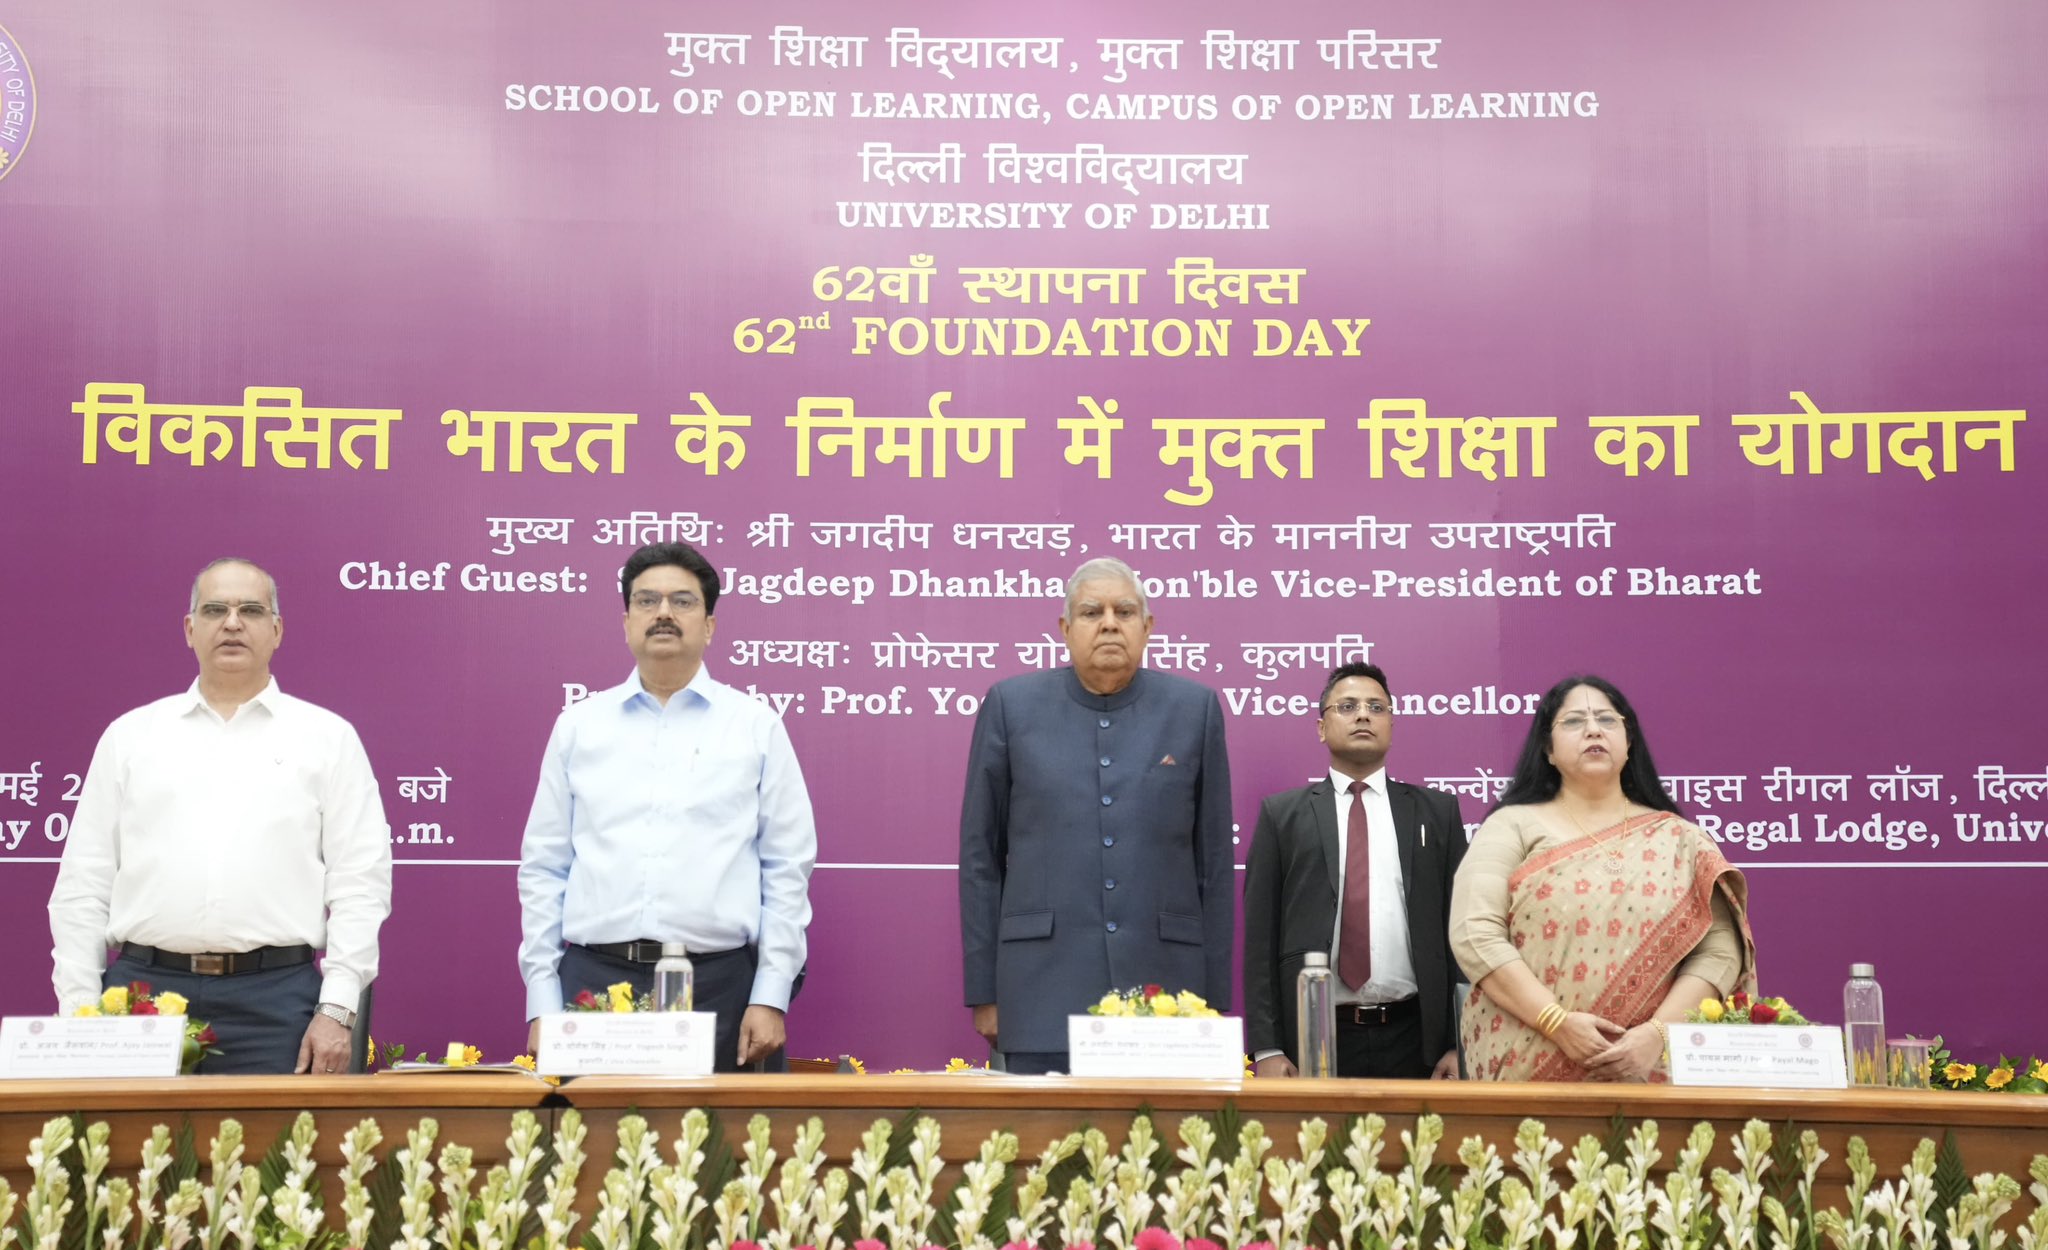 The Vice-President, Shri Jagdeep Dhankhar at the 62nd Foundation Day Ceremony of School of Open Learning, at University of Delhi in Delhi on May 6, 2024.